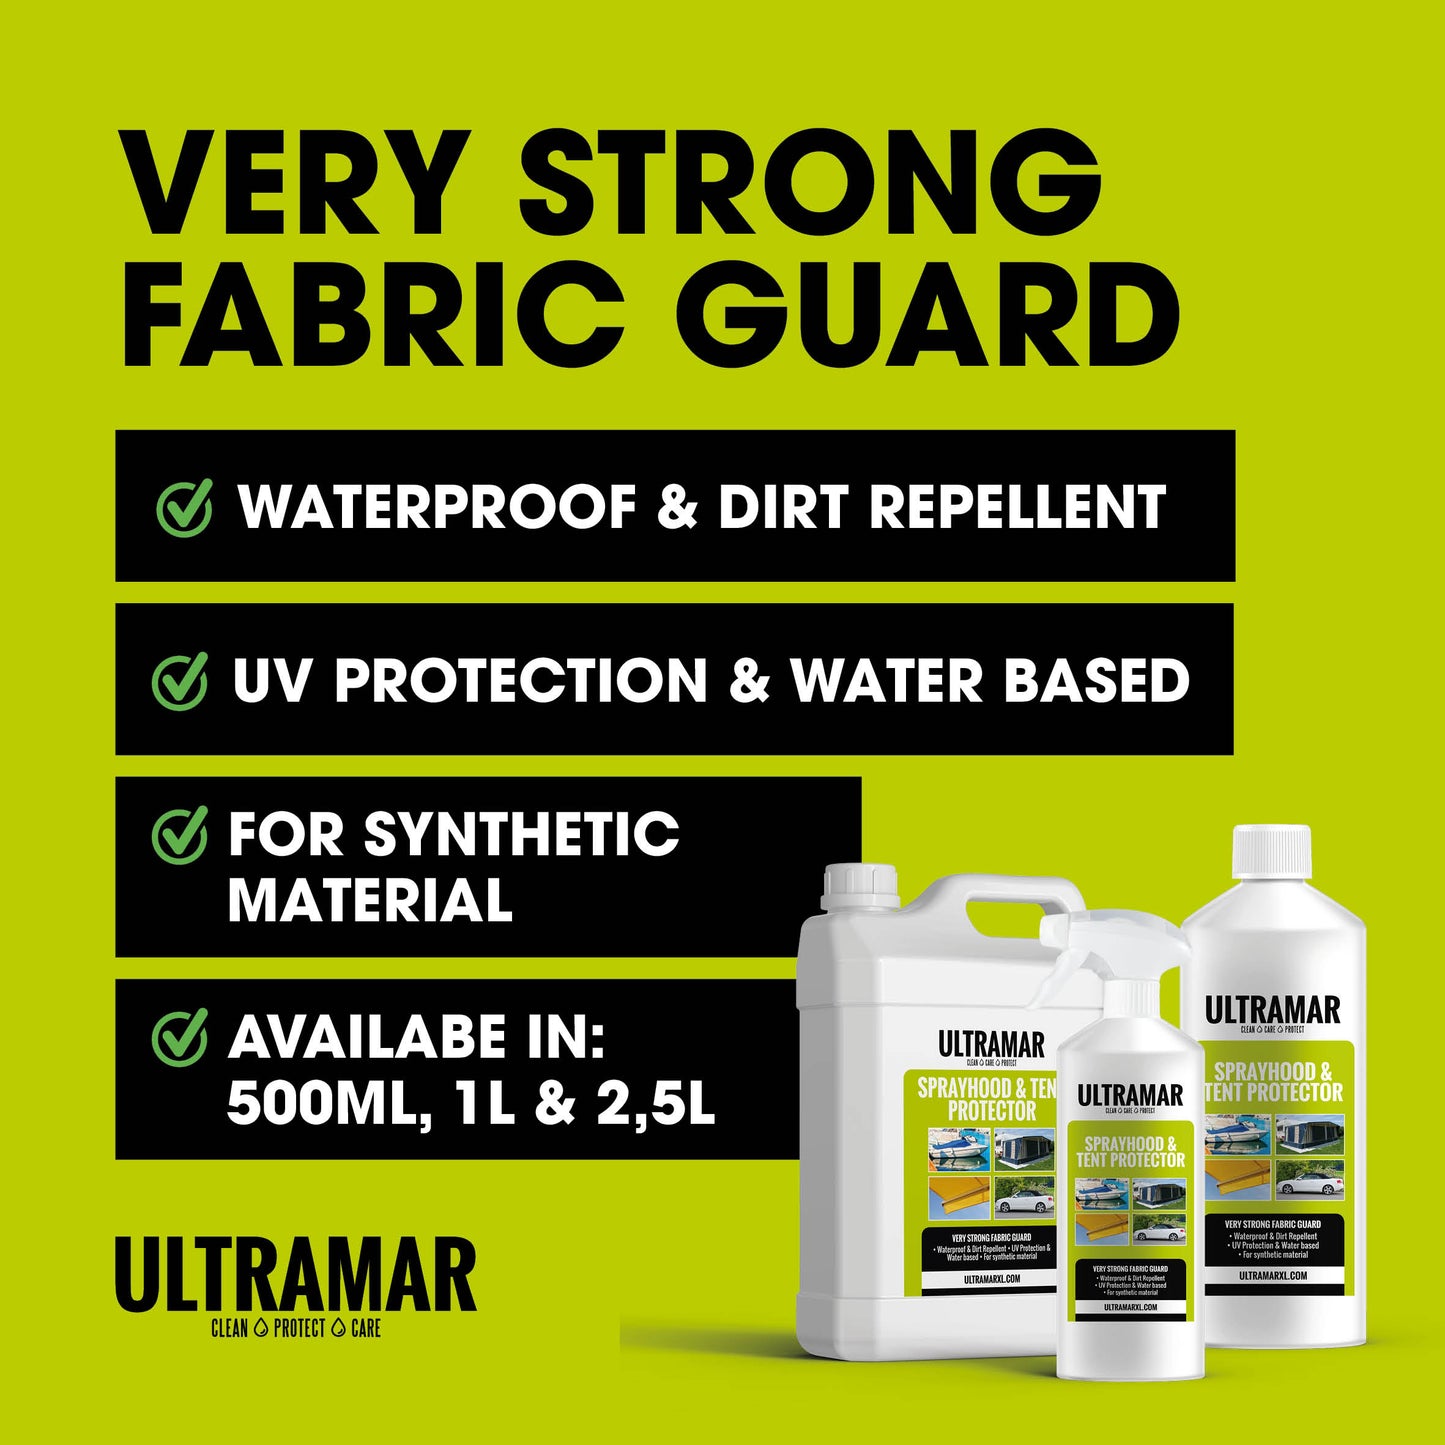 Impregnation agent for your convertible: Sprayhood & Tent Protector